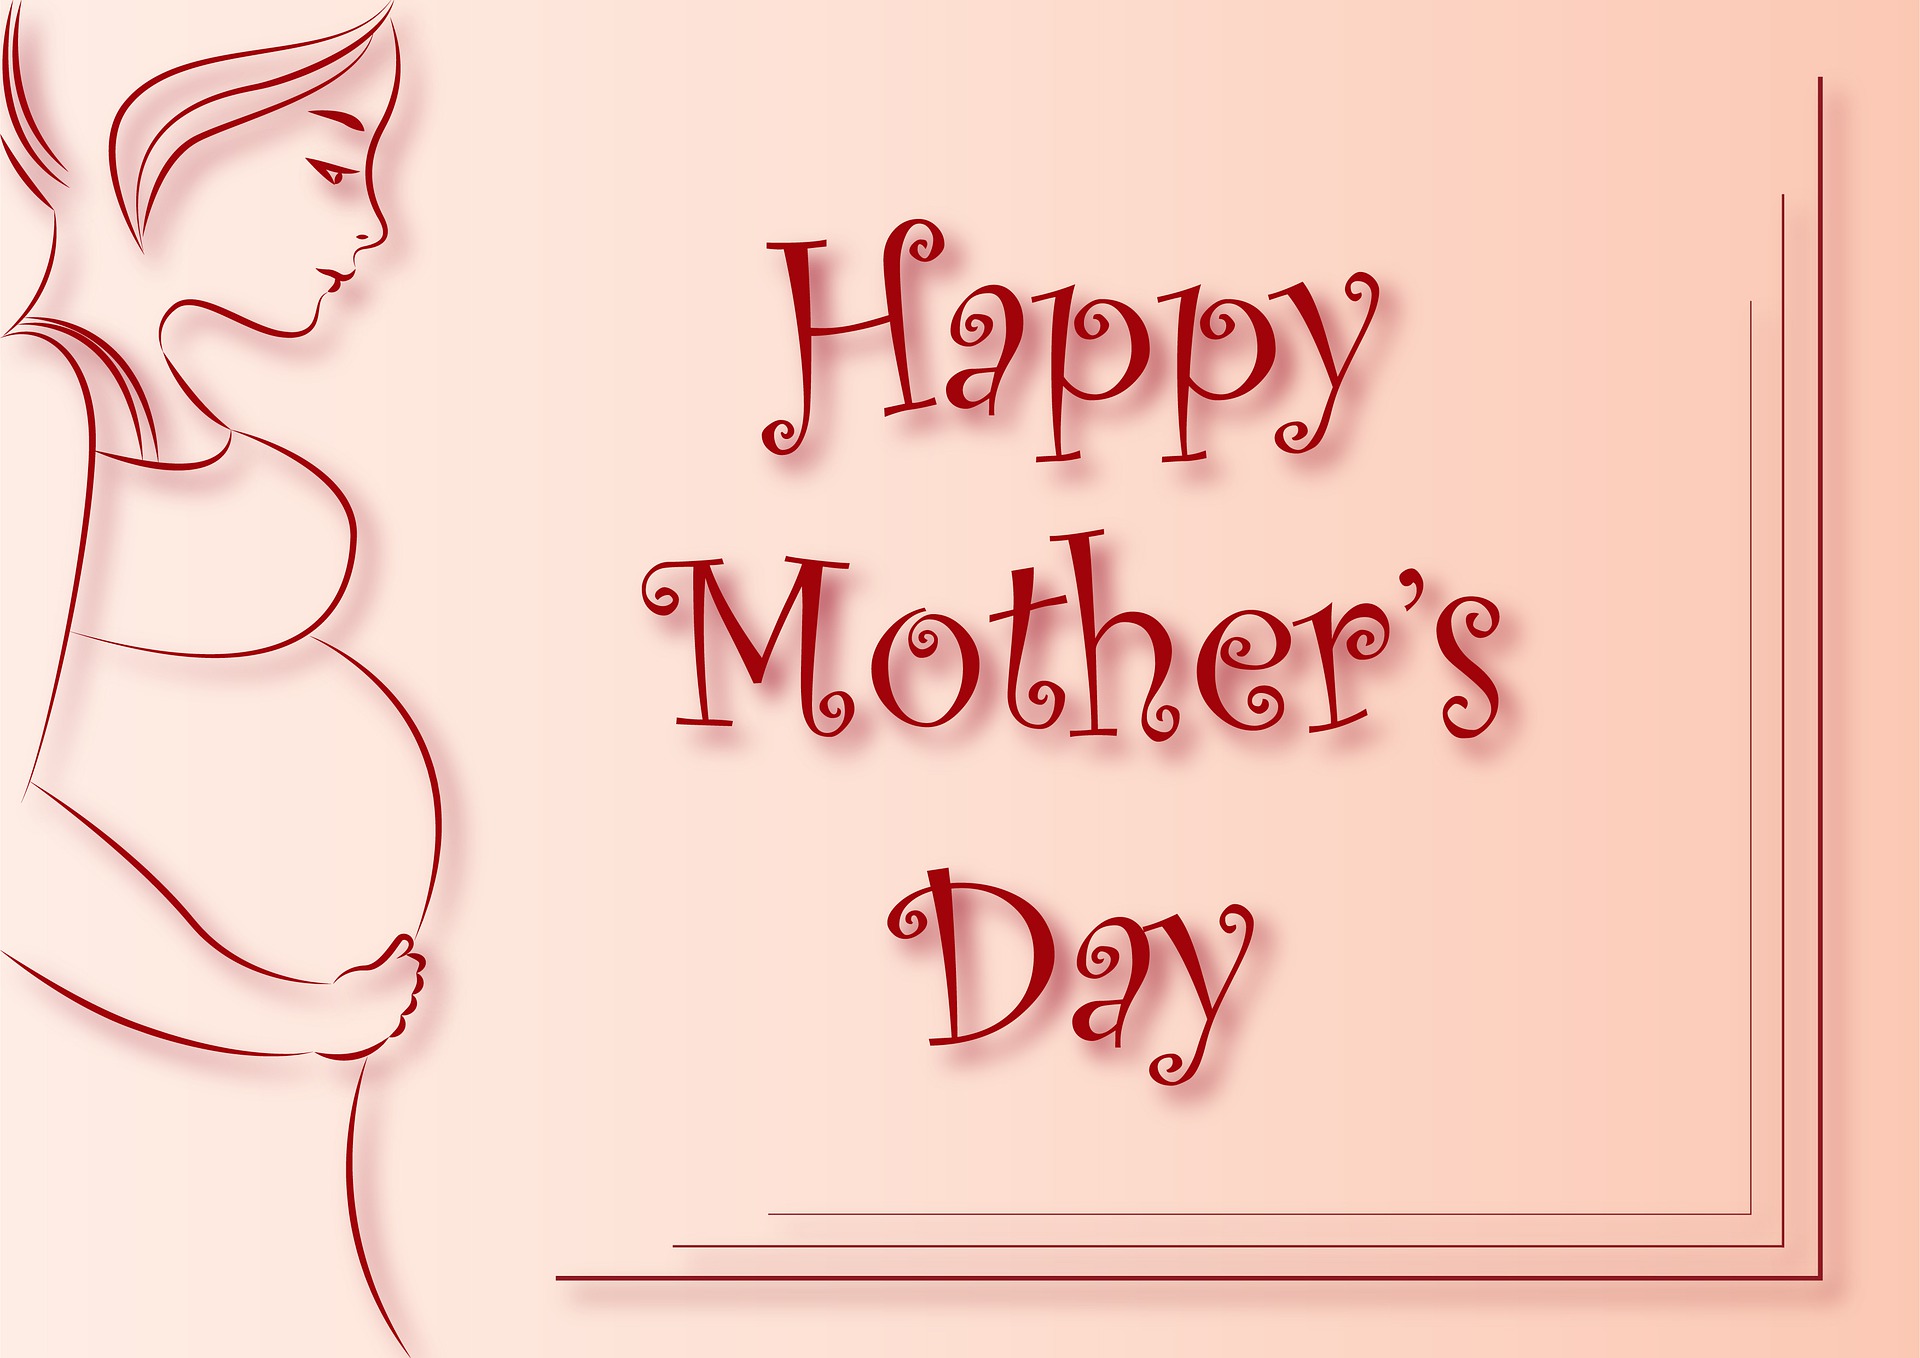 Mother's Day Card for Expecting Mothers by Erika Varga